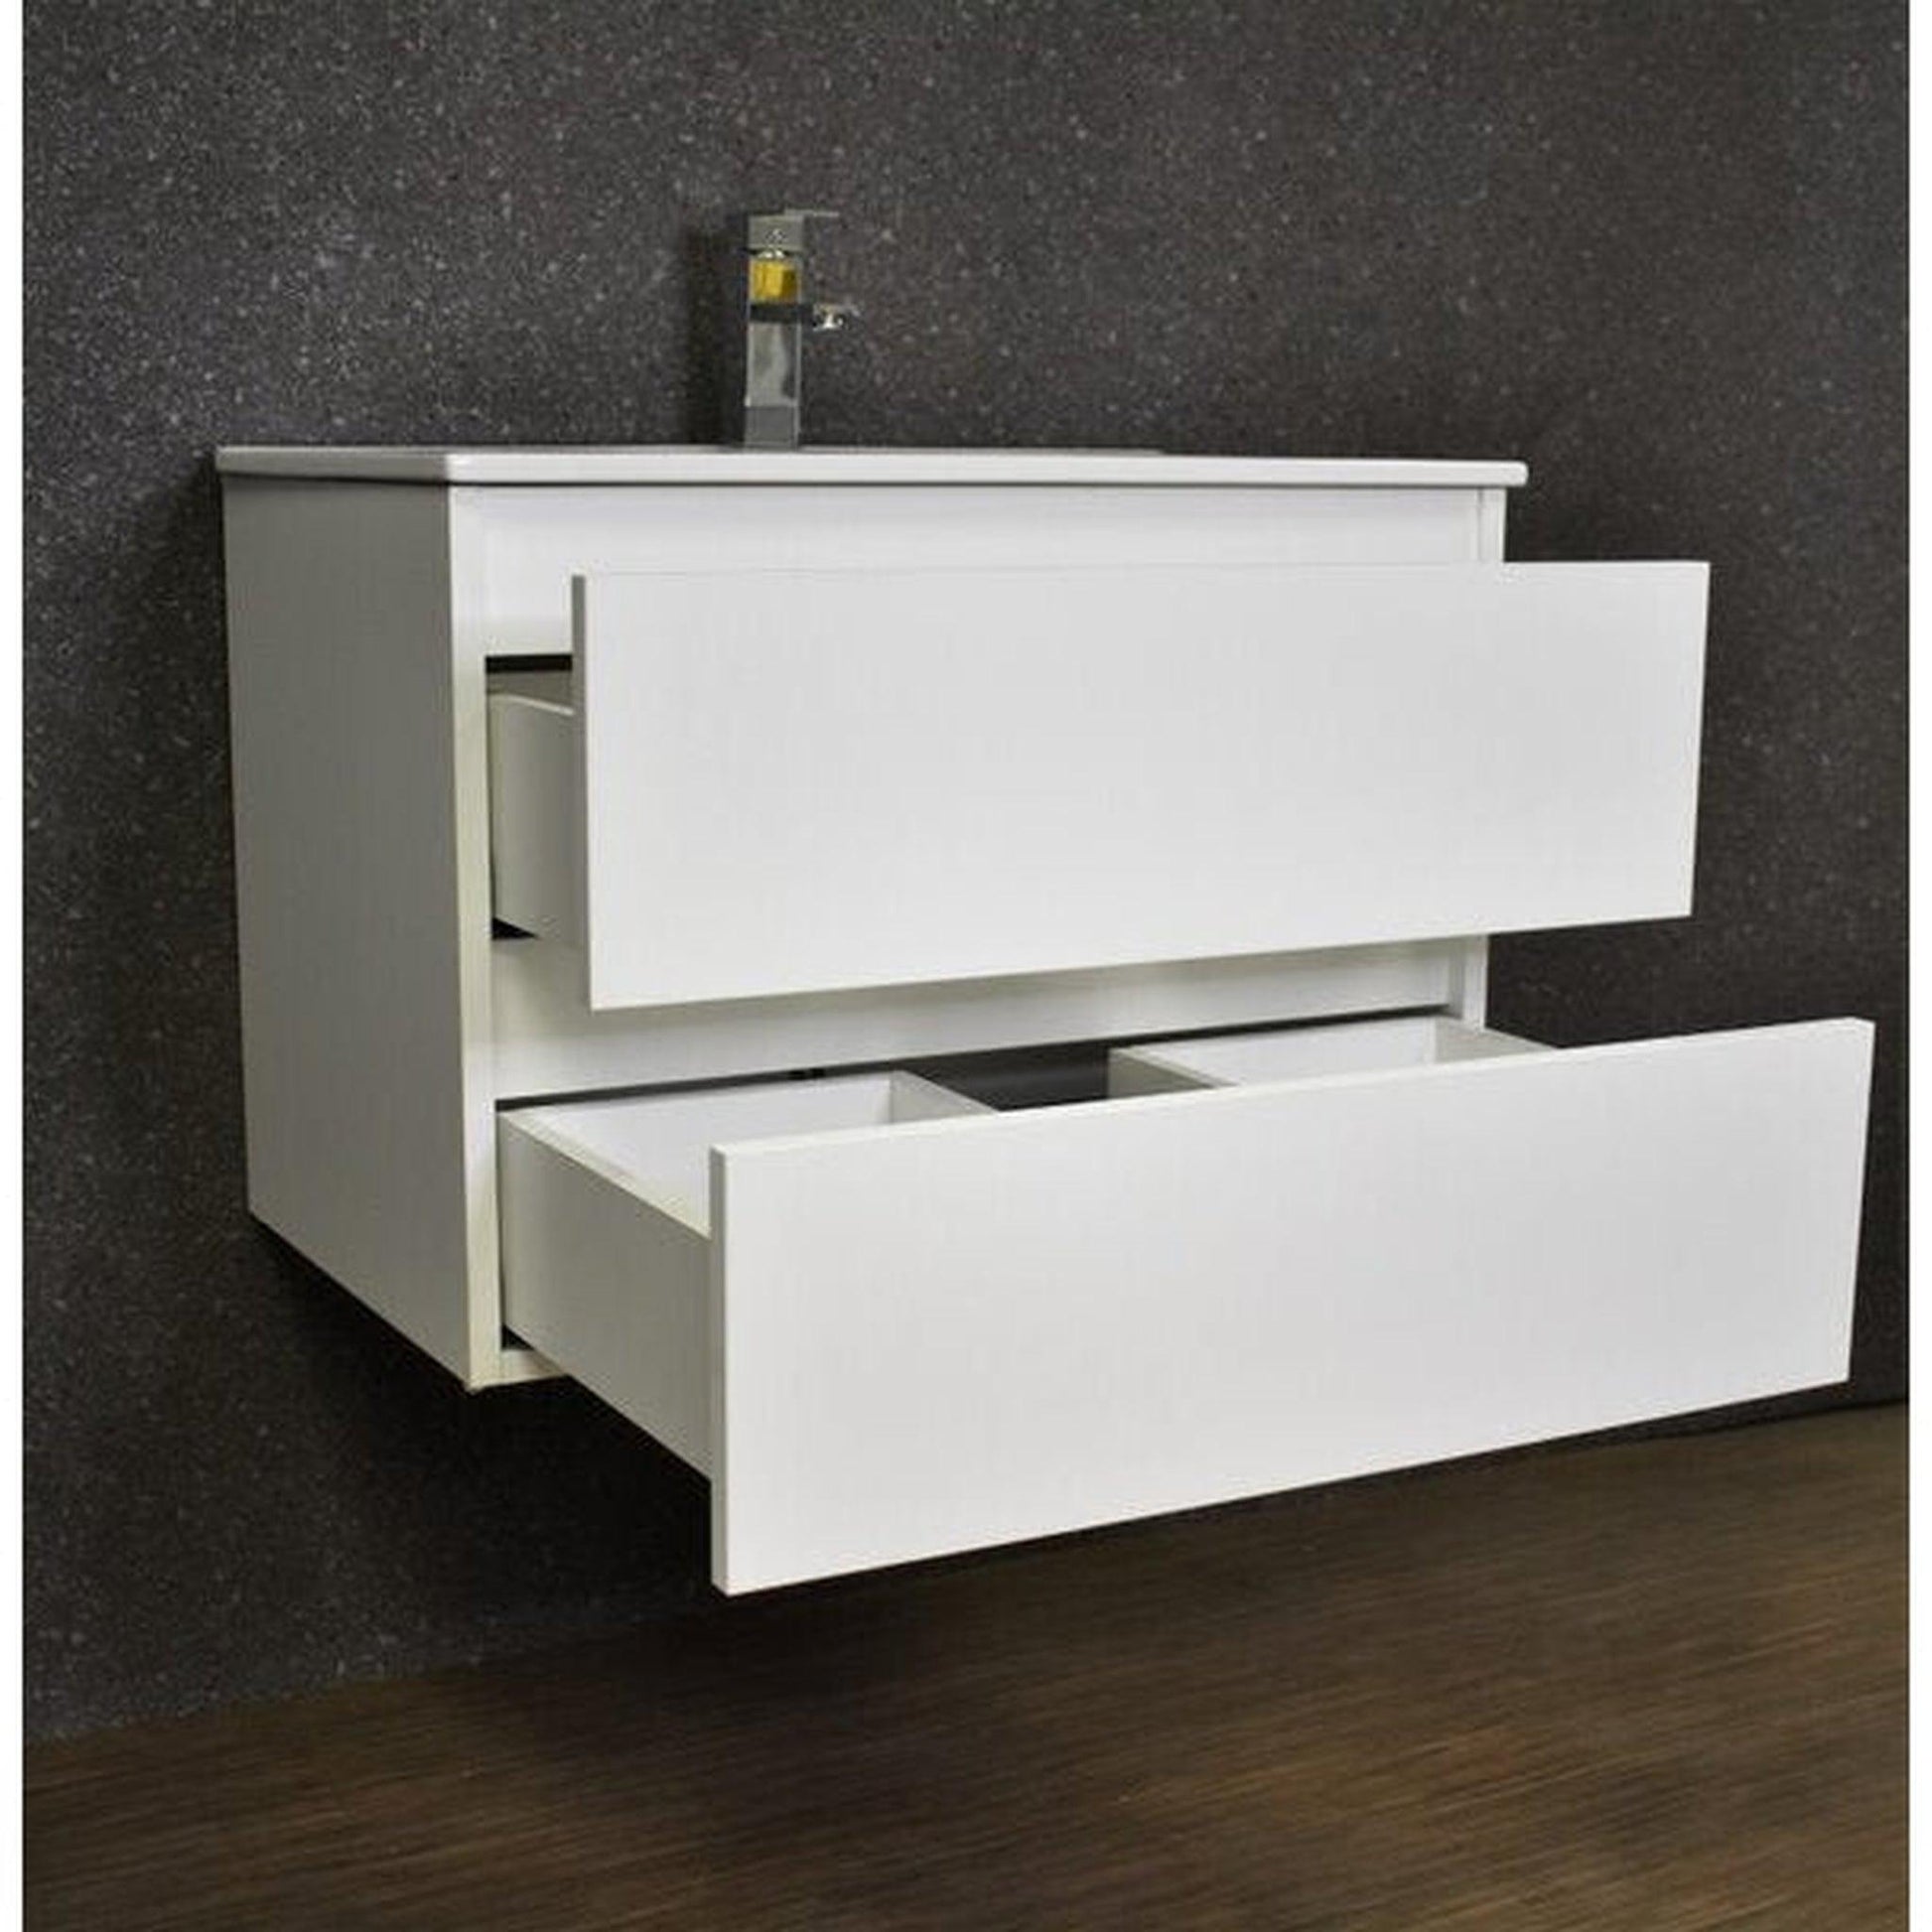 Volpa USA Salt 30" x 18" Glossy White Wall-Mounted Floating Bathroom Vanity With Drawers, Integrated Porcelain Ceramic Top and Integrated Ceramic Sink